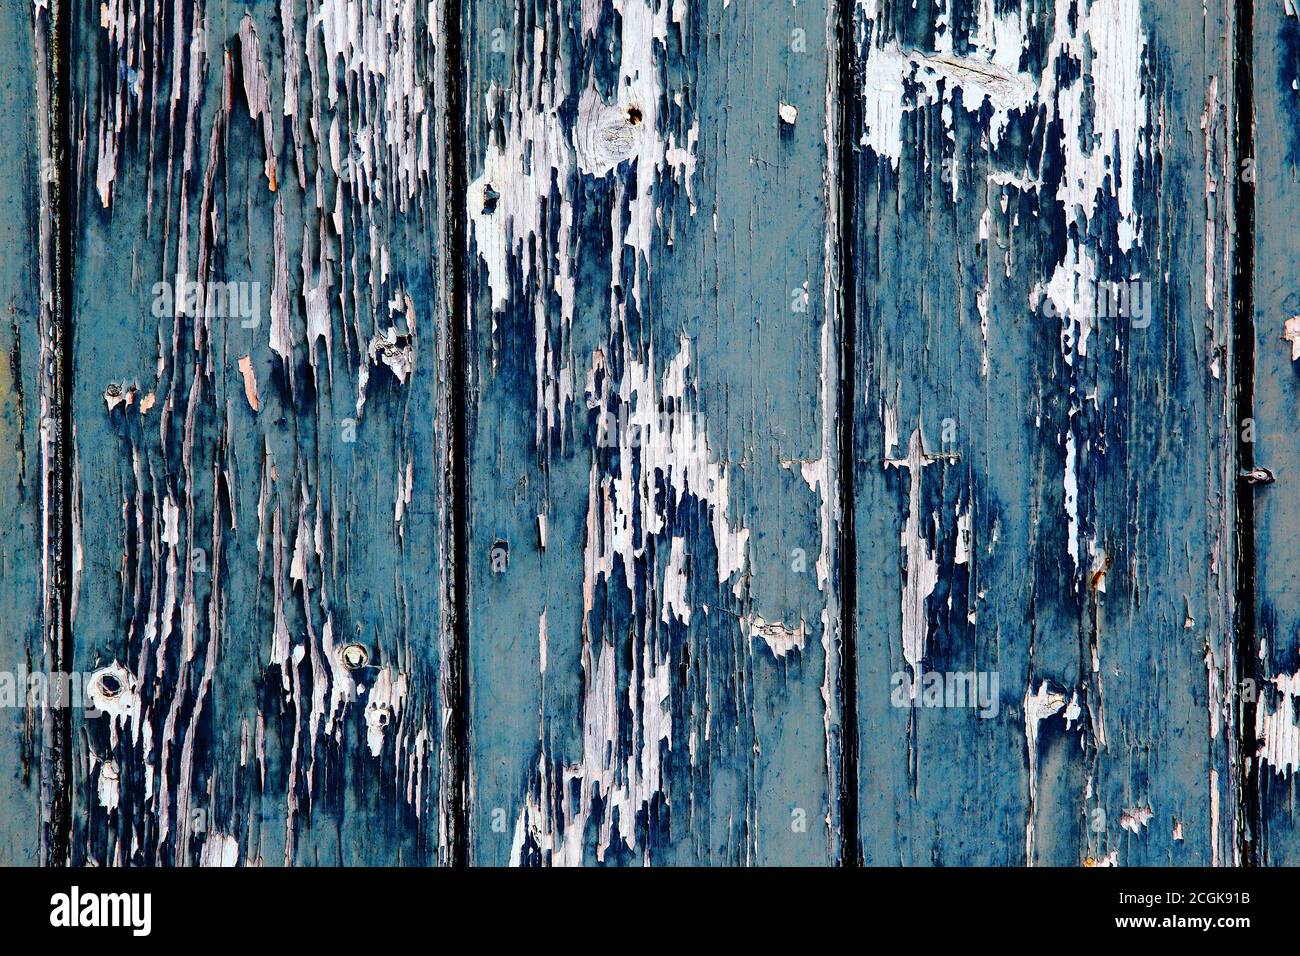 Aegean blue and sapphire blue old peeling worn paint on clapboard wood cladding. Texture textured background. Stock Photo